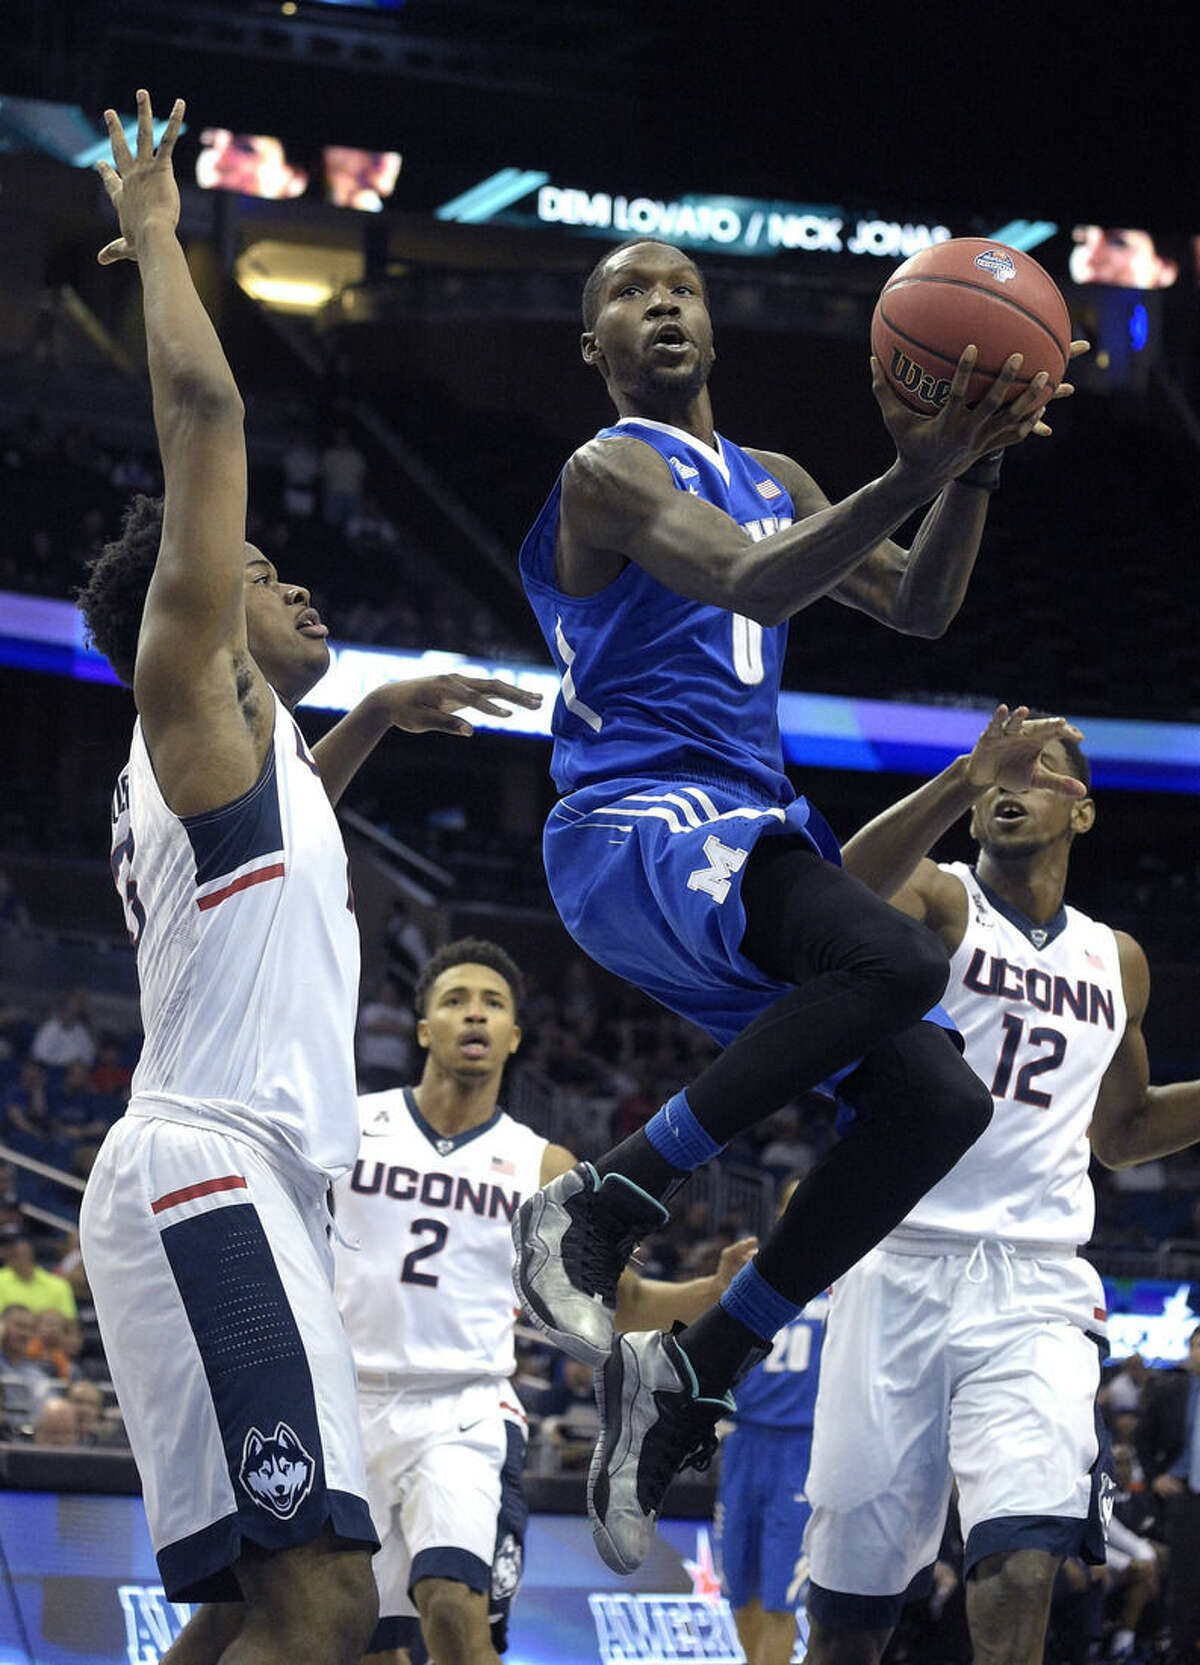 Memphis forward Trashon Burrell (0) goes up for a shot in front of Connecticut forward Steven Enoch (13), left, guard Jalen Adams (2) and forward Kentan Facey (12) during the first half of an NCAA college basketball game in the finals of the American Athletic Conference men's tournament in Orlando, Fla., Sunday, March 13, 2016. (AP Photo/Phelan M. Ebenhack)